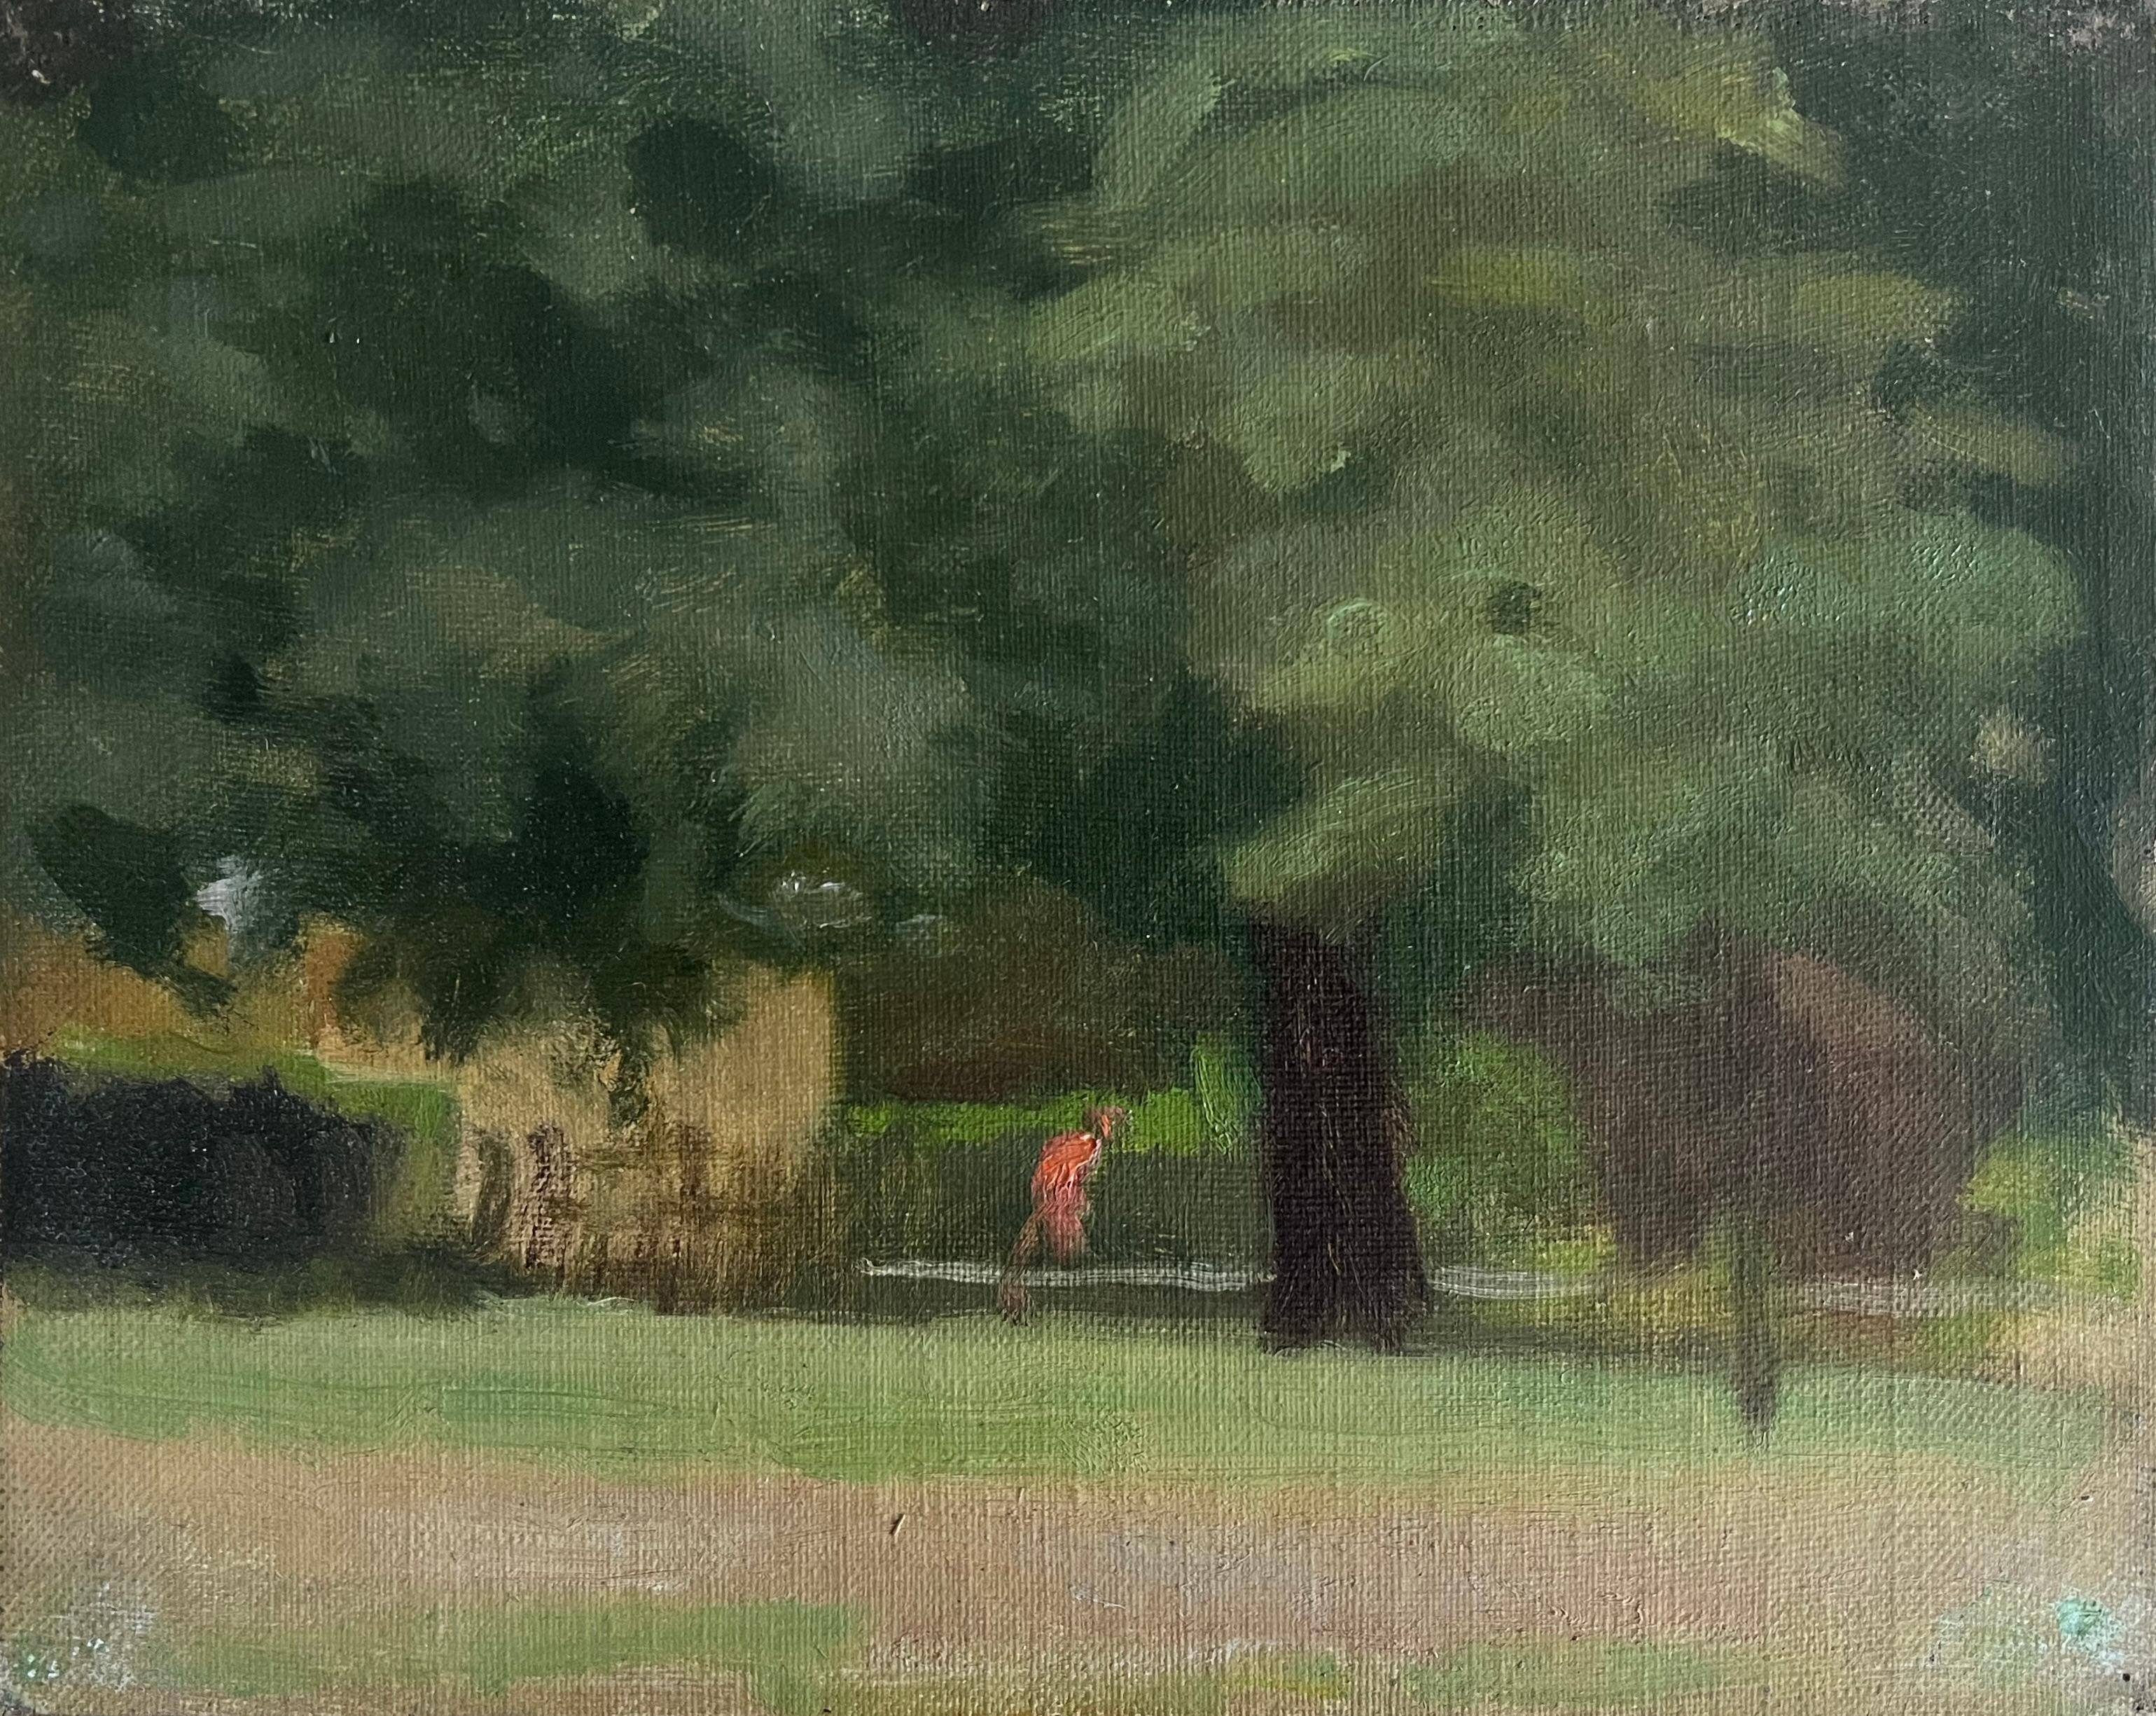 A very atmospheric sketch of a figuring hurrying through a park. The red figure drawn into focus against a green background.

Circle of Paul Fordyce Maitland (1863-1909)
A figure in a park
Oil on canvas laid down on board
7¼ x 9½ inches without